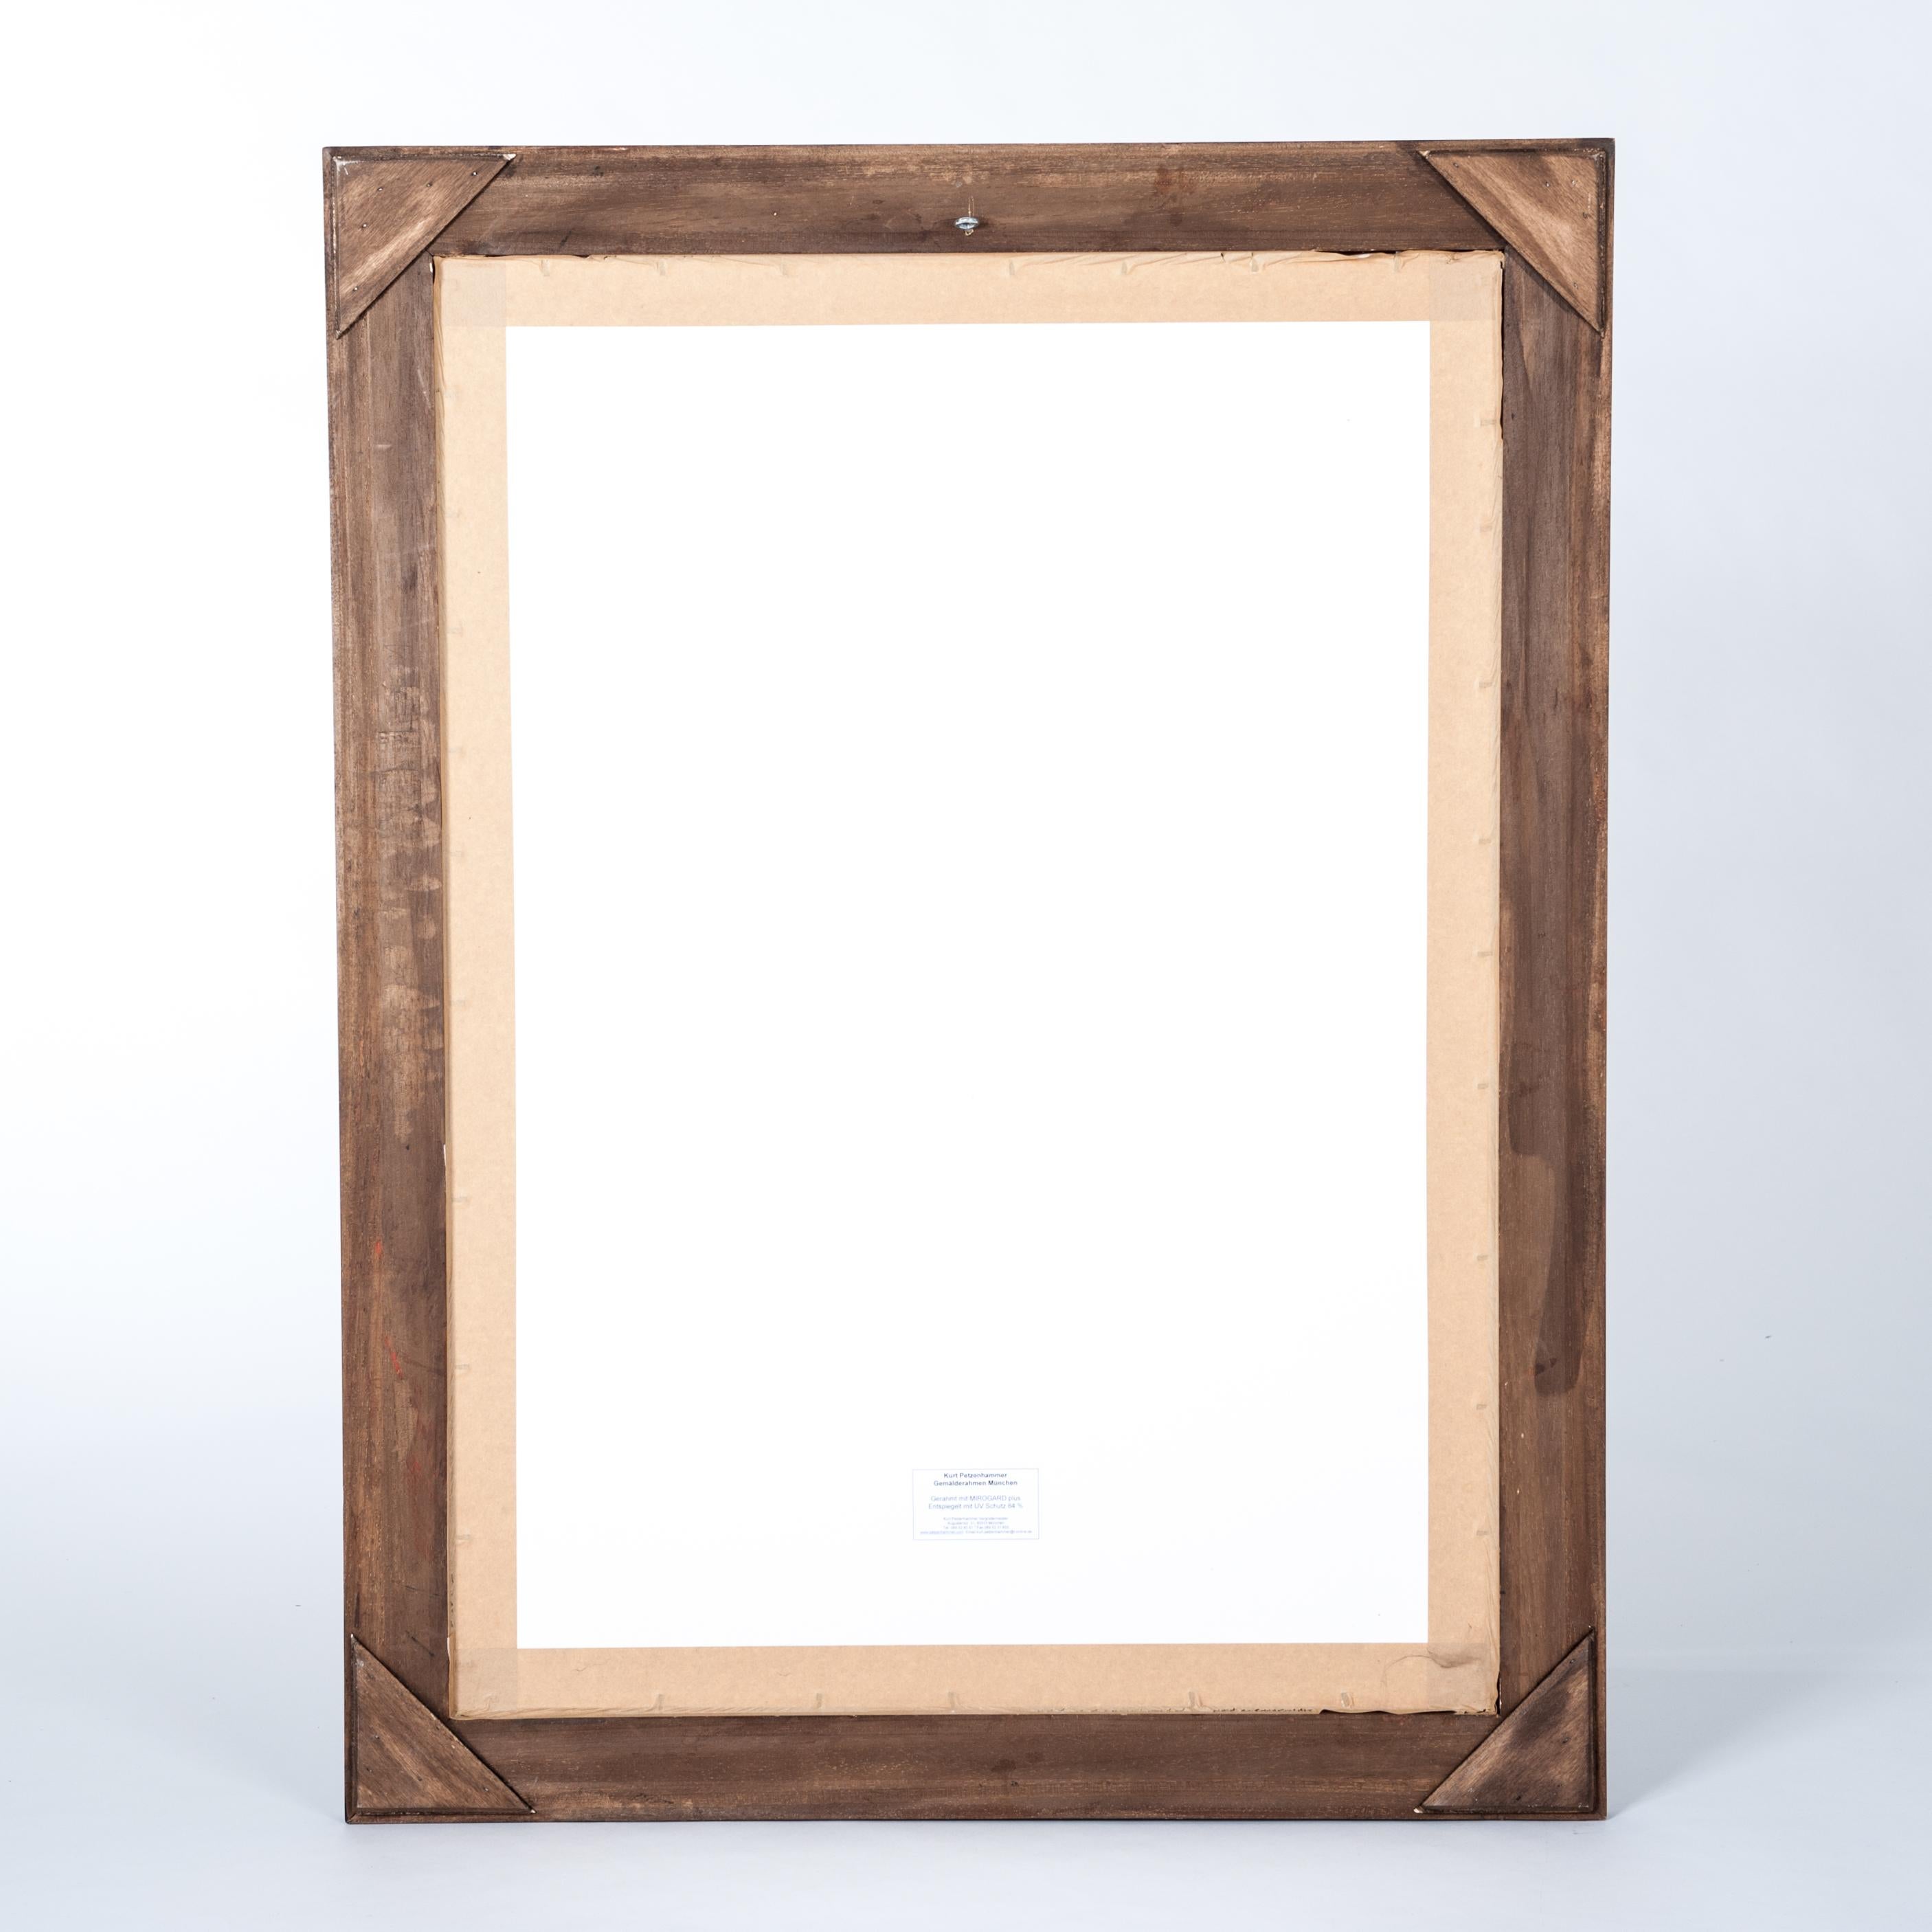 Hand-Crafted Charcoal Drawing Black-Beige Michel Batlle 1987 Handworked Frame, Museums Glass For Sale